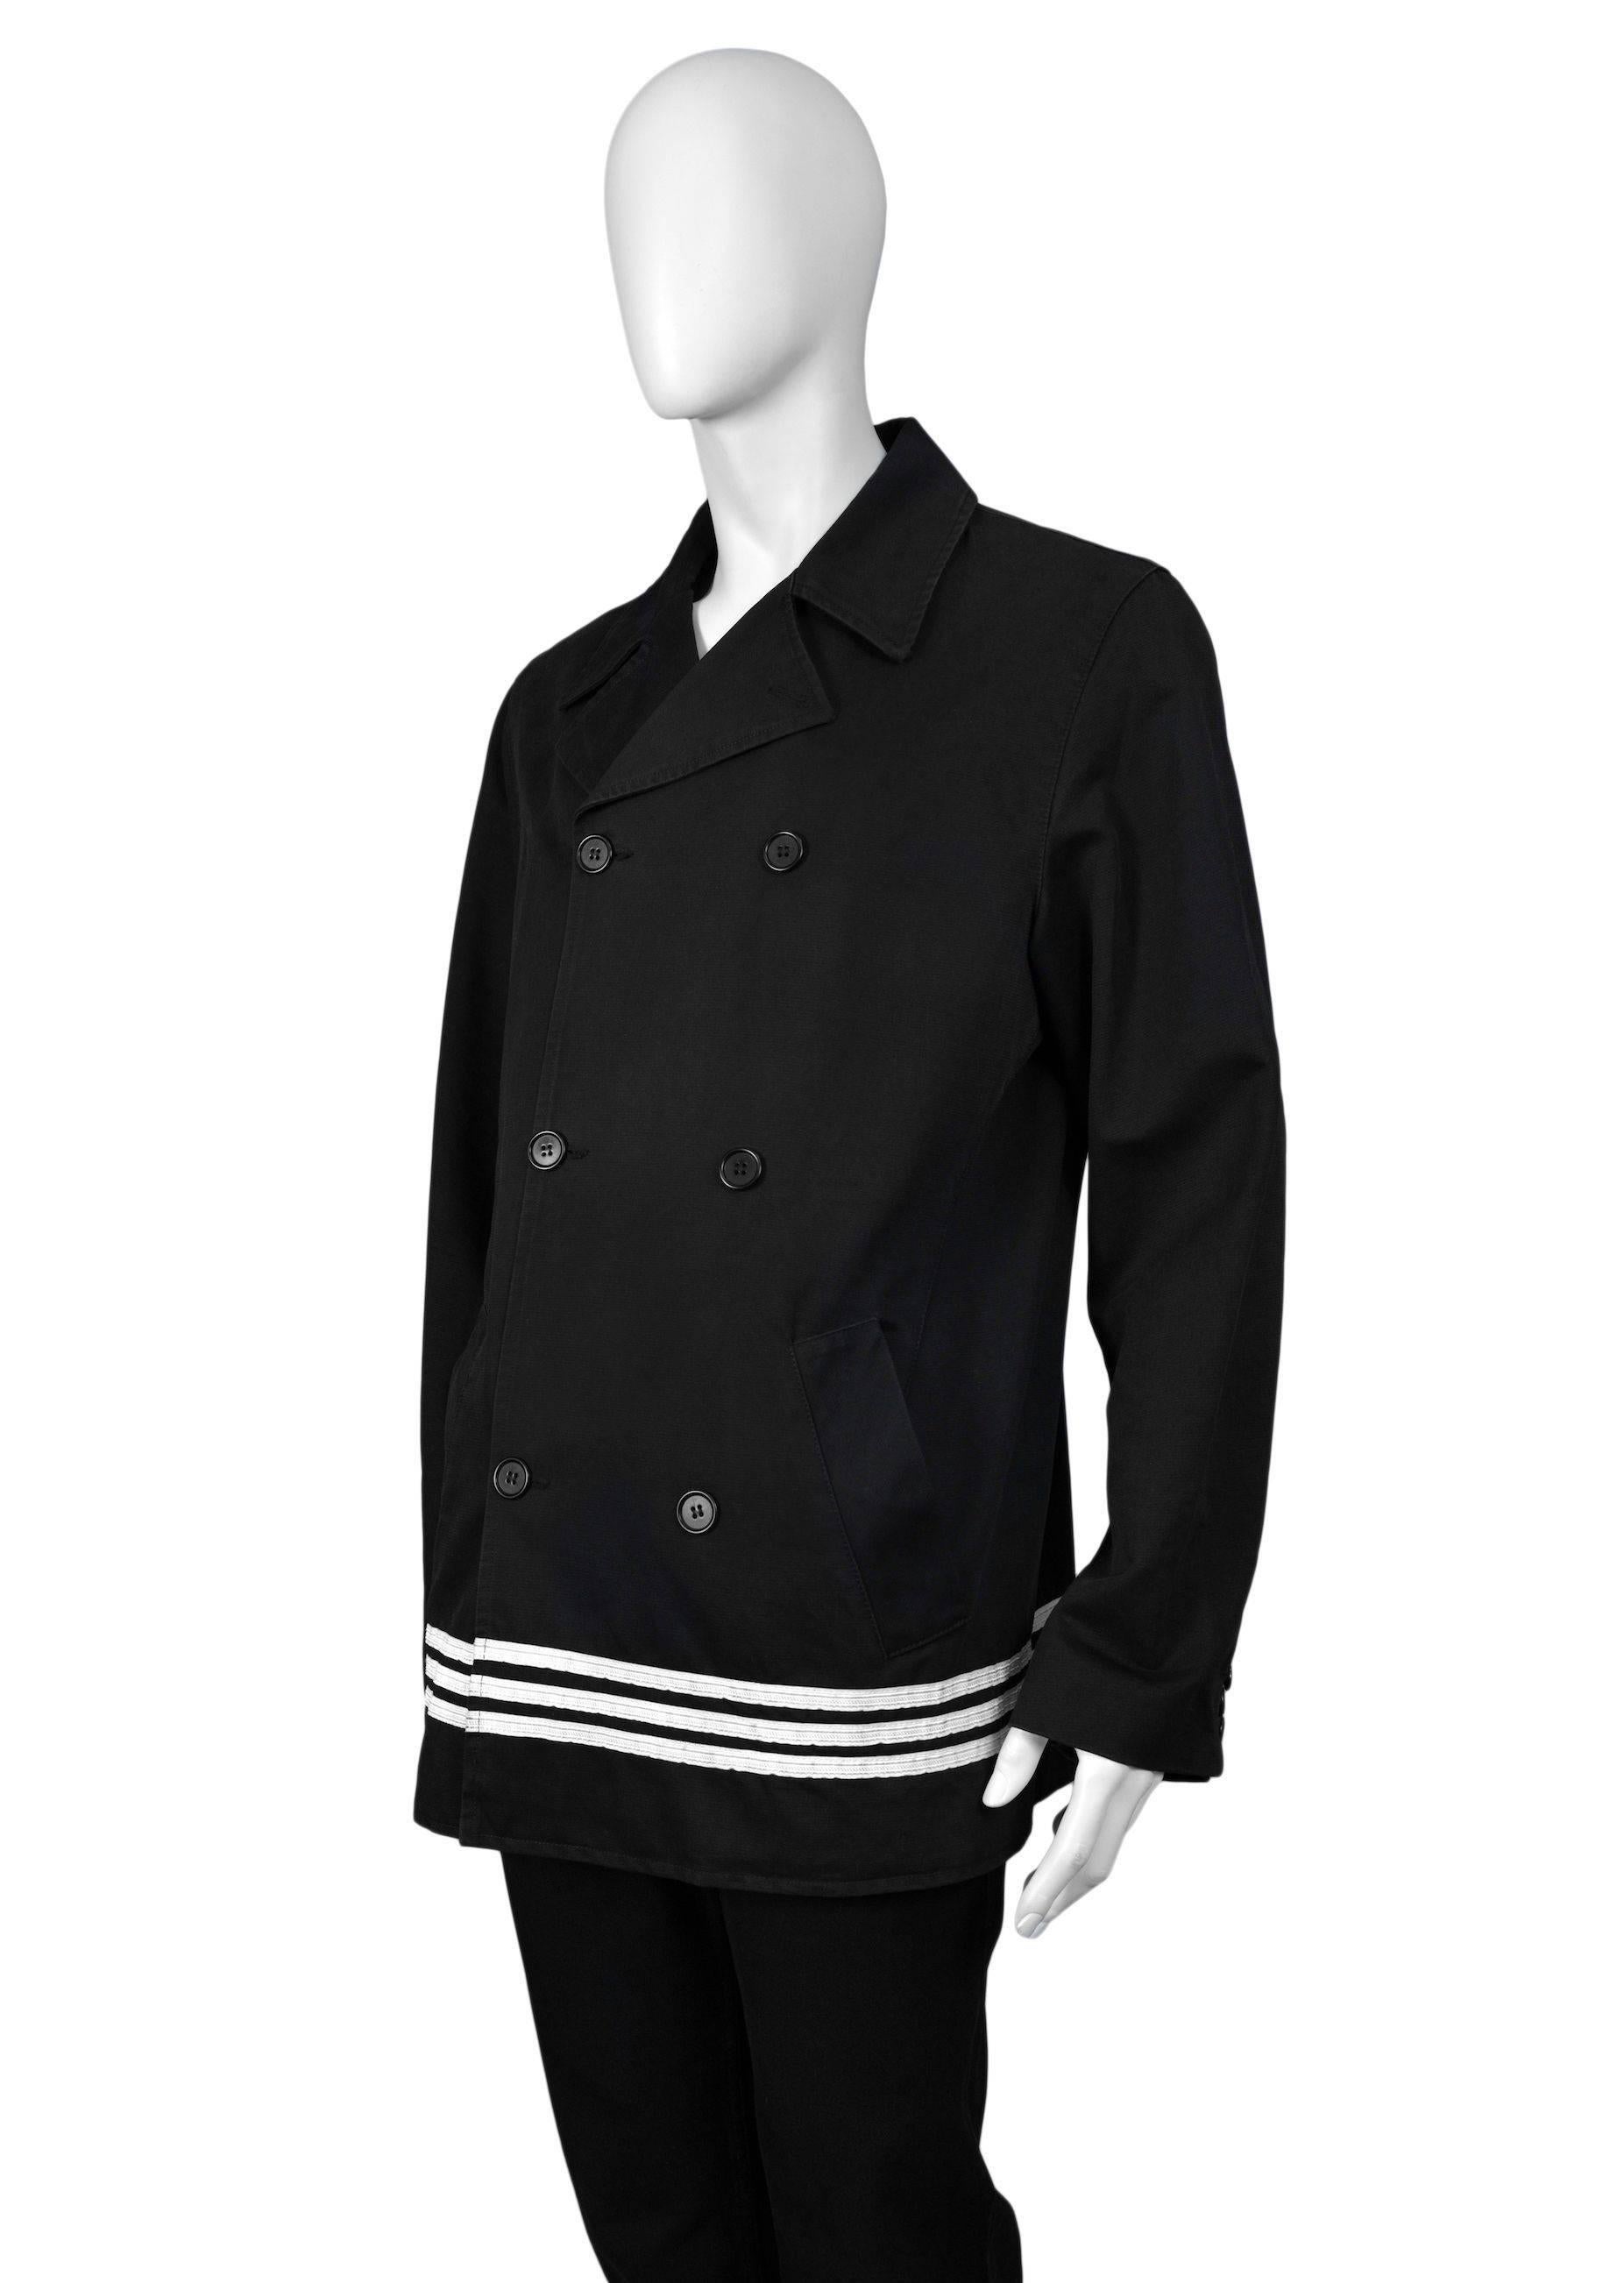 Helmut Lang mens black double breasted peacoat with white stripe trim at hem.